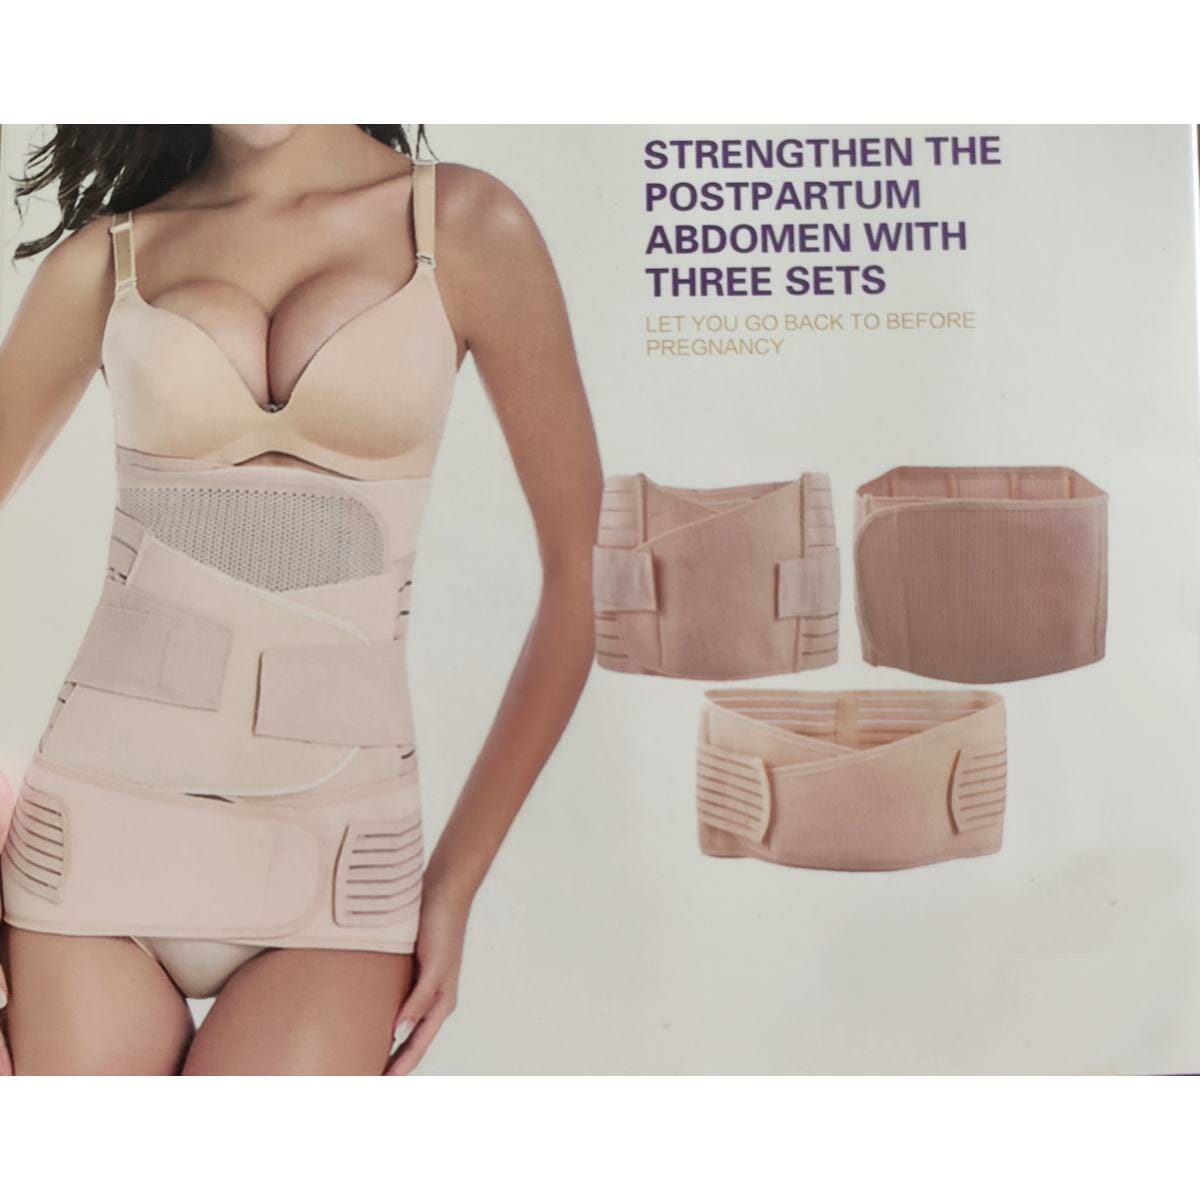 C section recovery belt Shopping Online In Pakistan